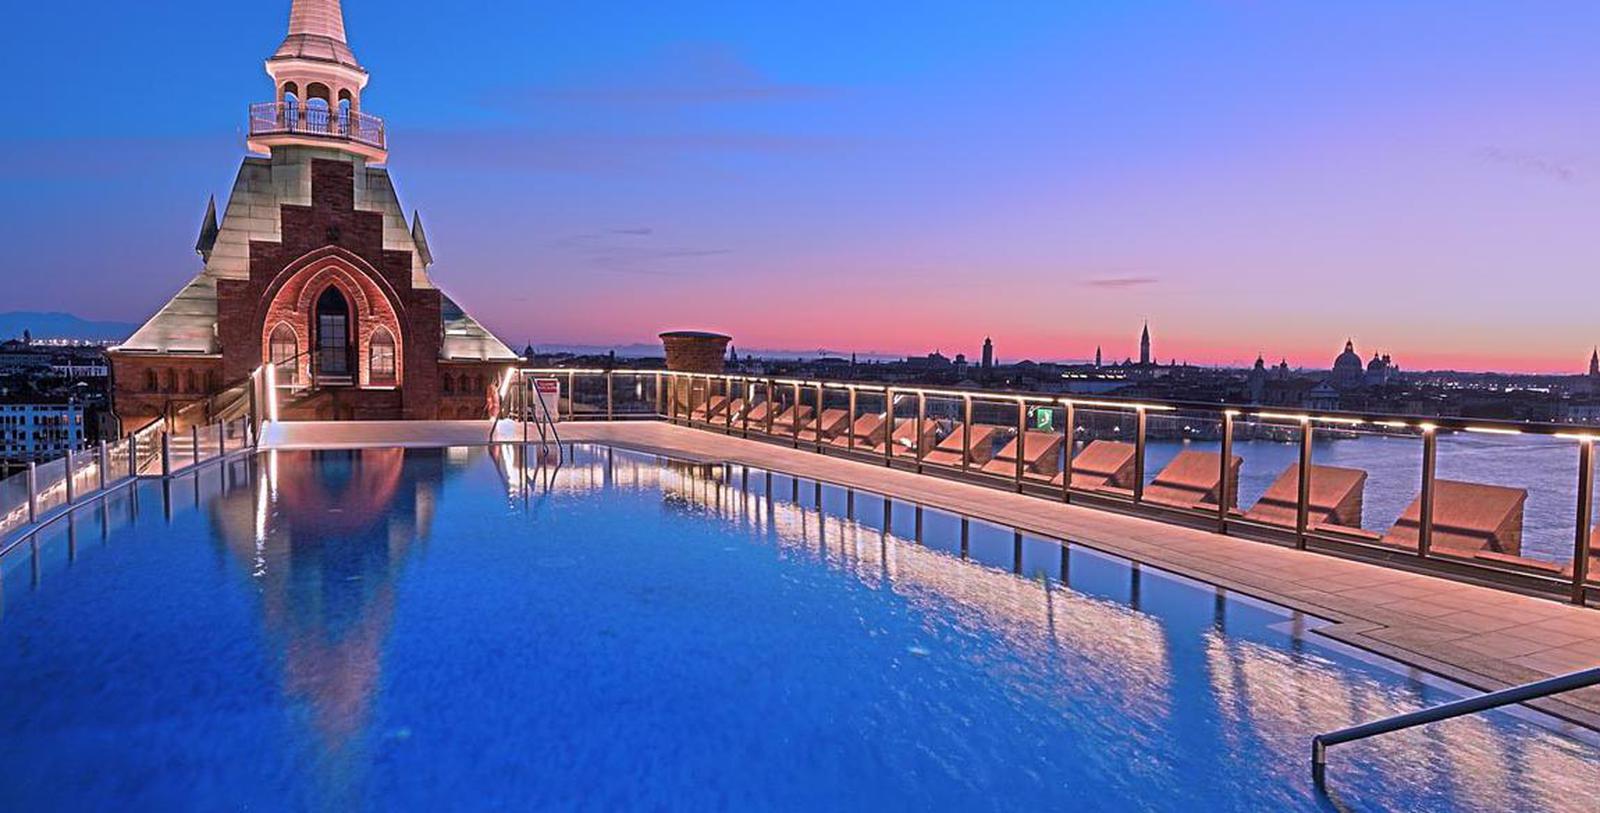 Image of Outdoor Rooftop Pool, Hilton Molino Stucky Venice, Italy, 1884, Member of Historic Hotels Worldwide, Hot Deals